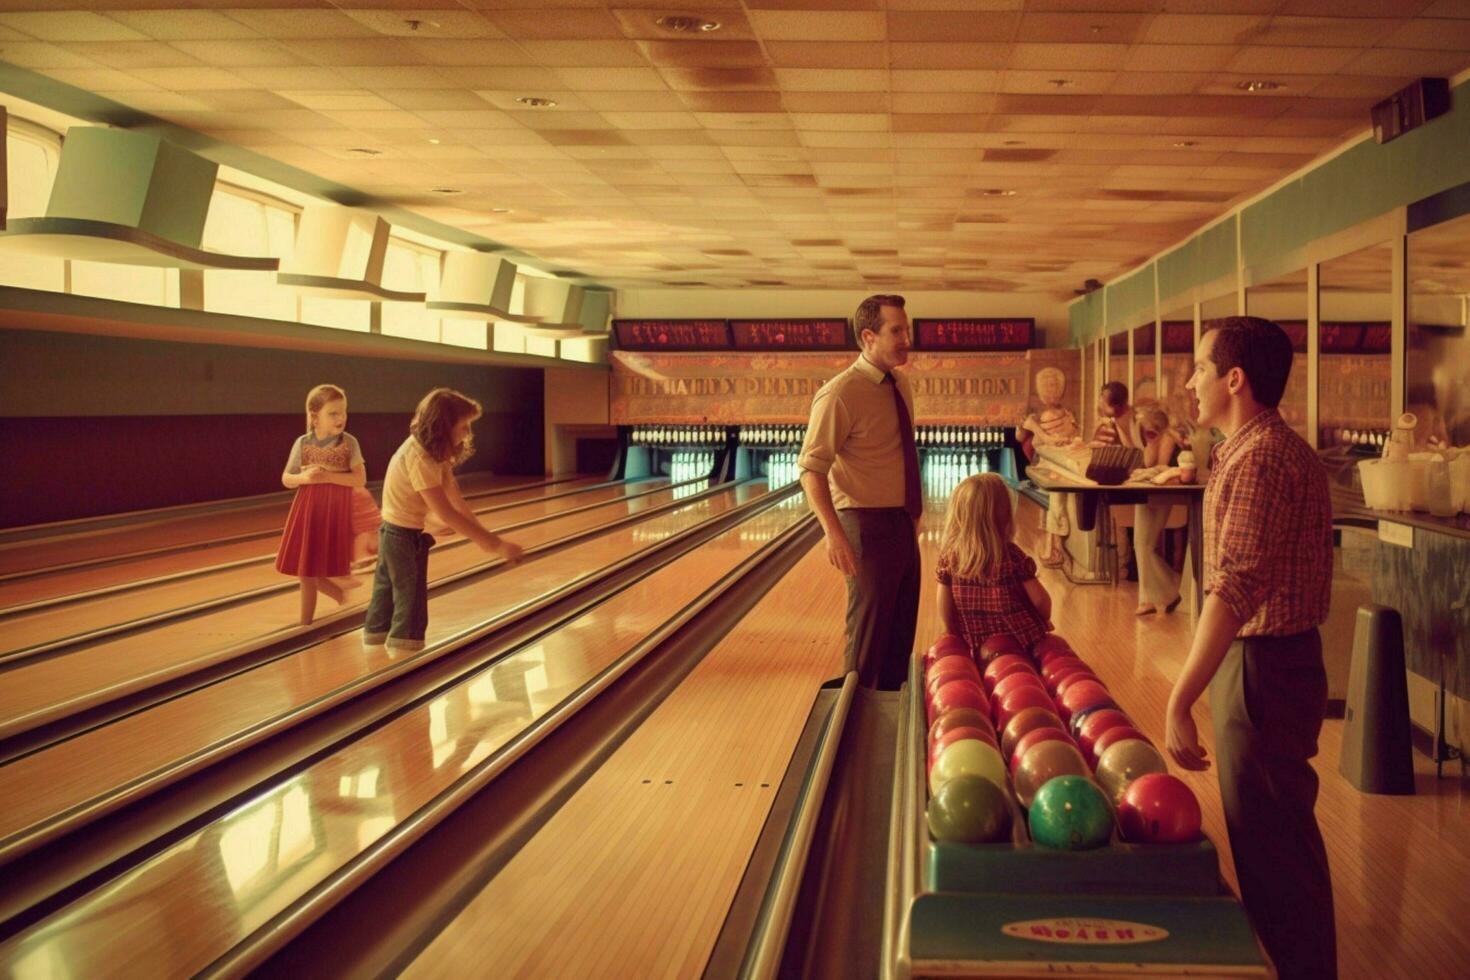 A family game of bowling on Fathers Day photo